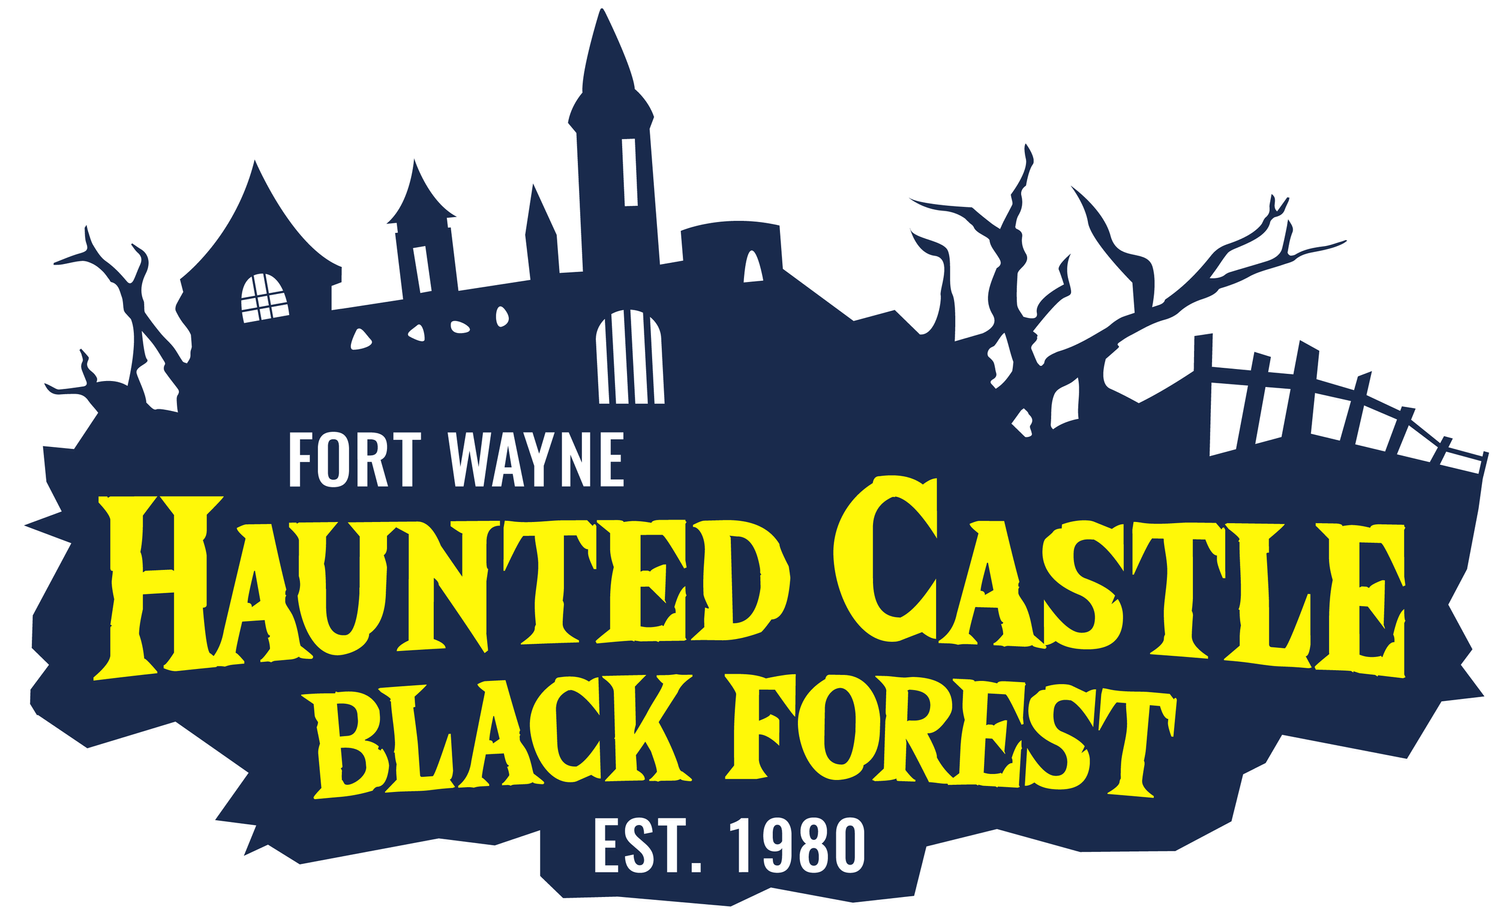 Fort Wayne Haunted Castle and Black Forest